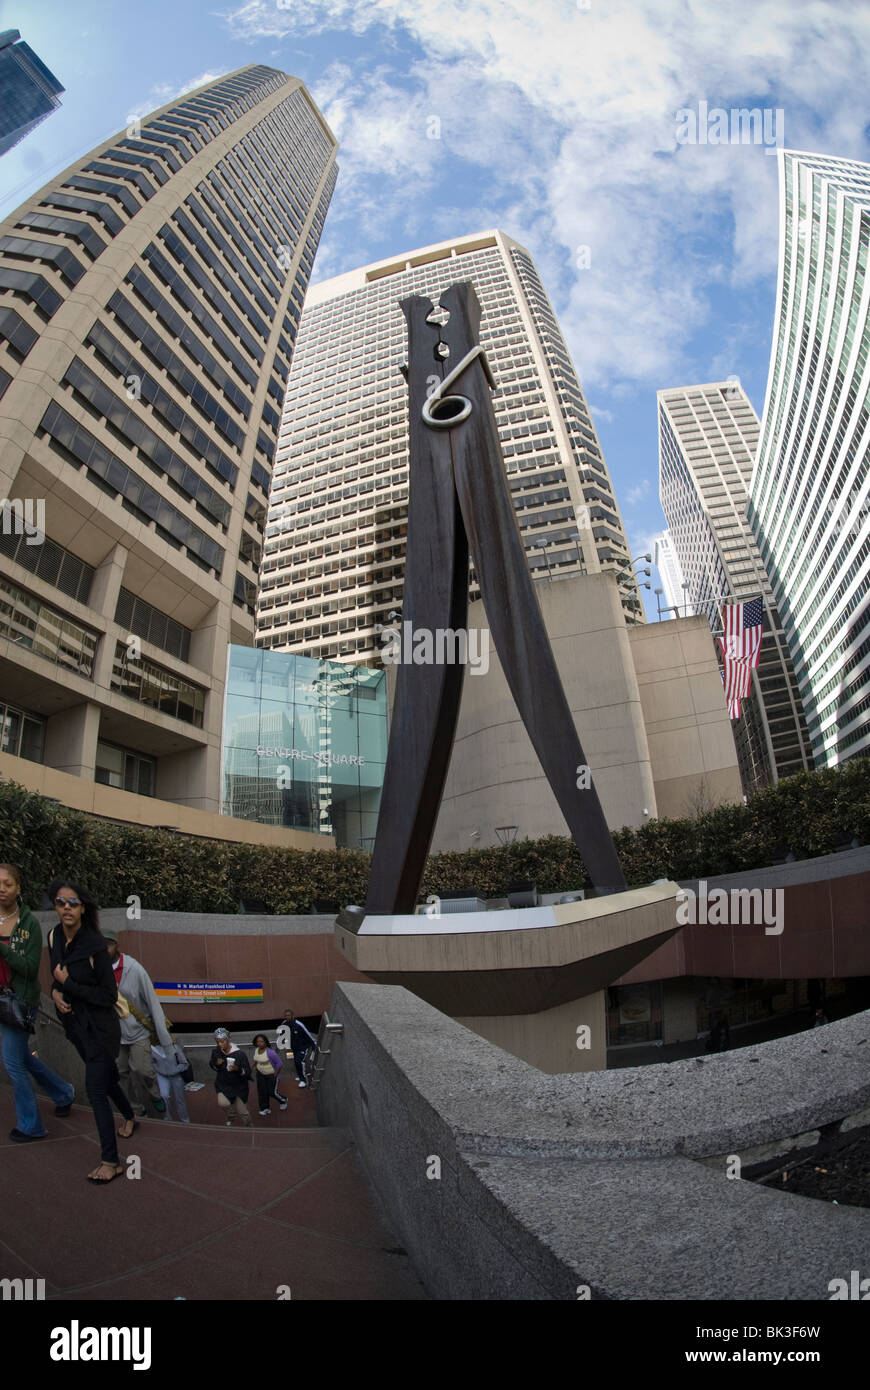 The Clothespin sculpture by Claes Oldenburg in Philadelphia, PA Stock Photo